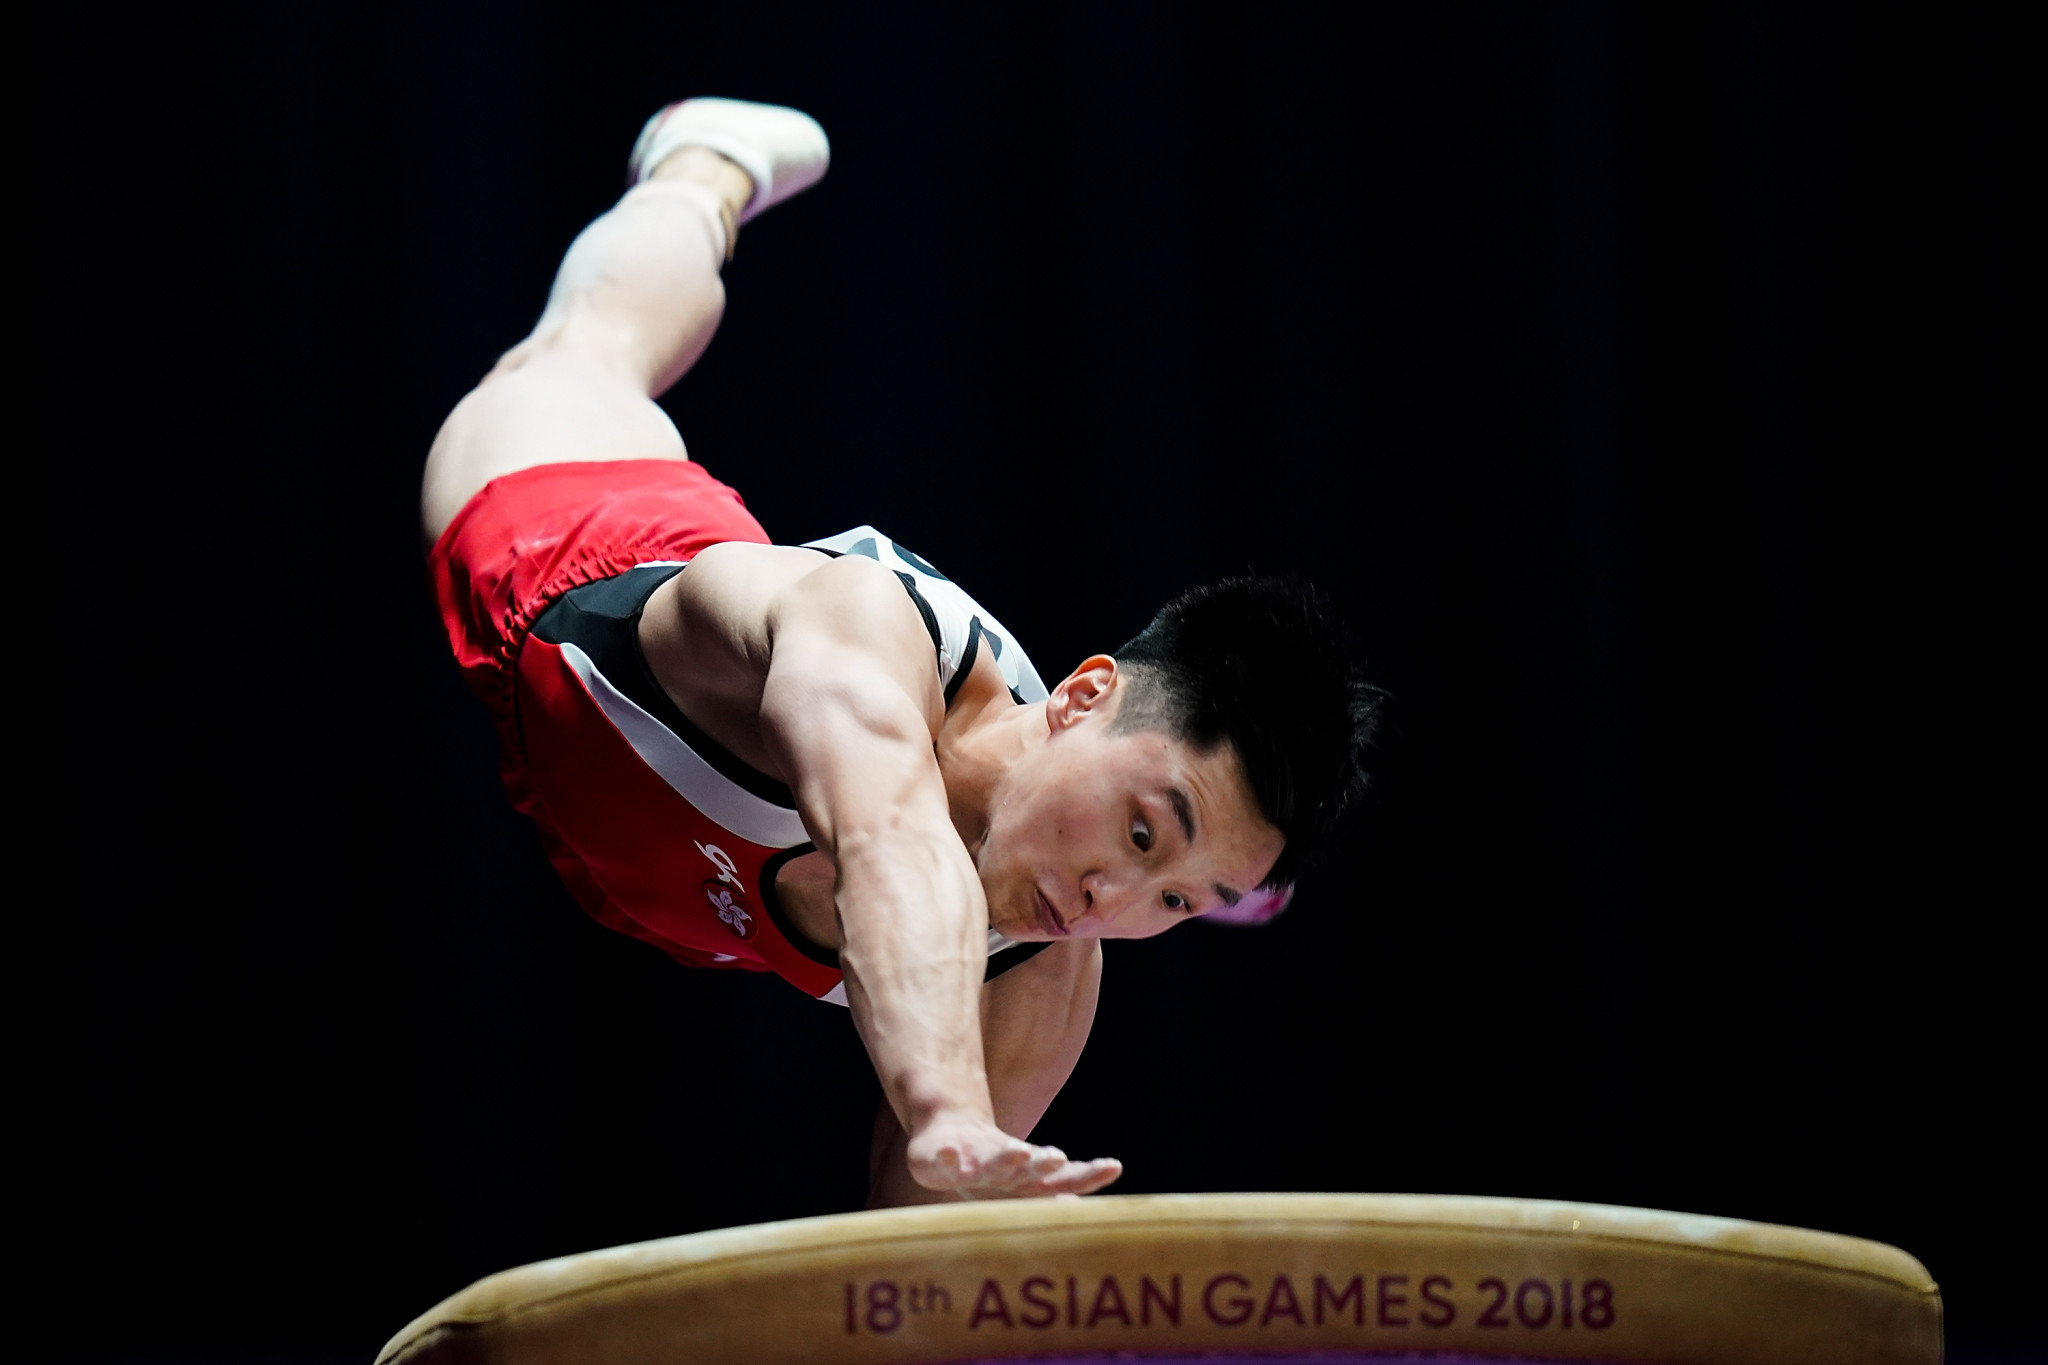 Hong Kong's Asian Games gold medallist Shek Wai Hung won the vault competition ©Getty Images